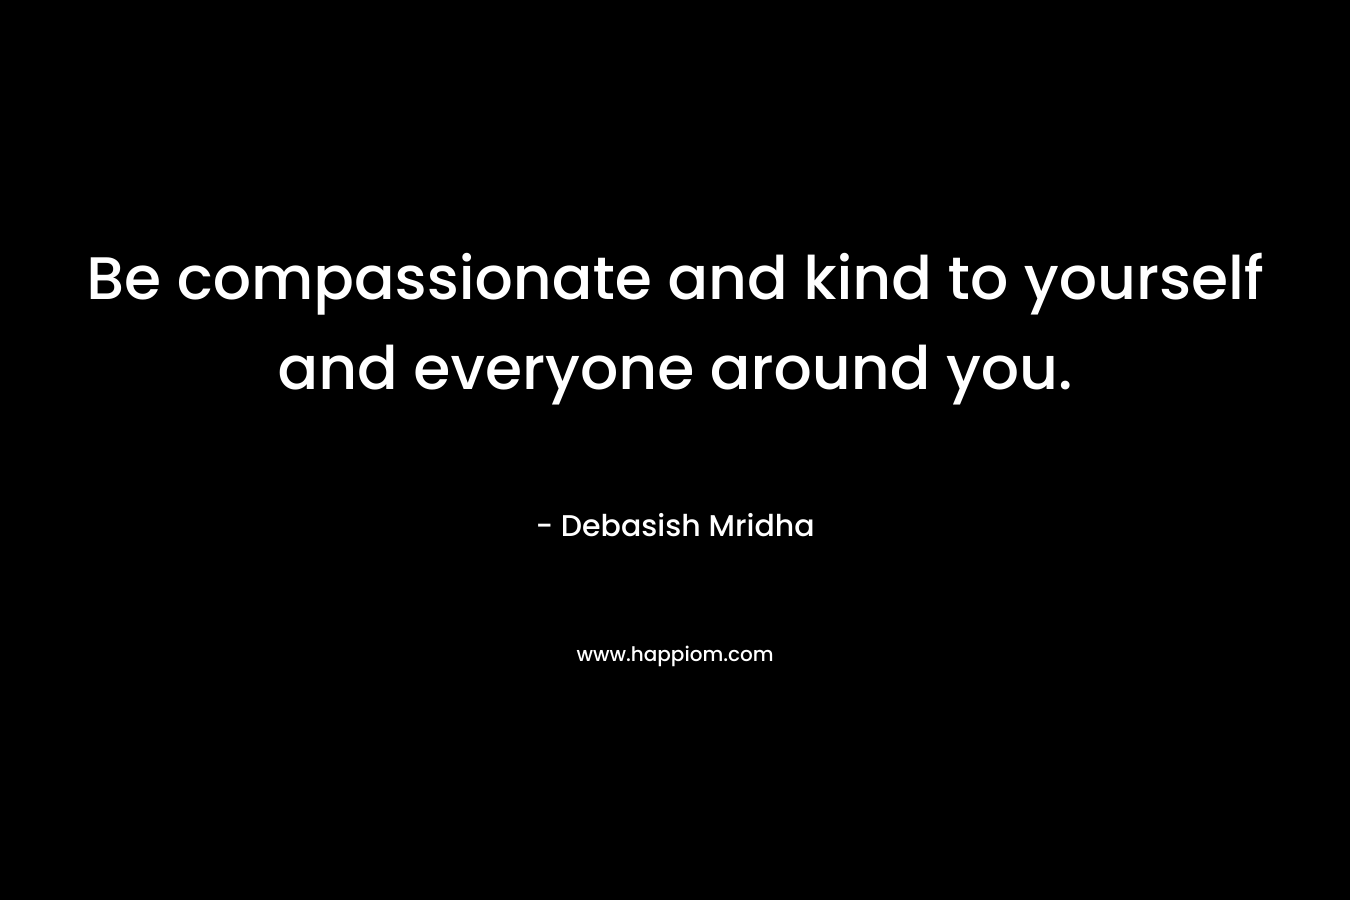 Be compassionate and kind to yourself and everyone around you. – Debasish Mridha